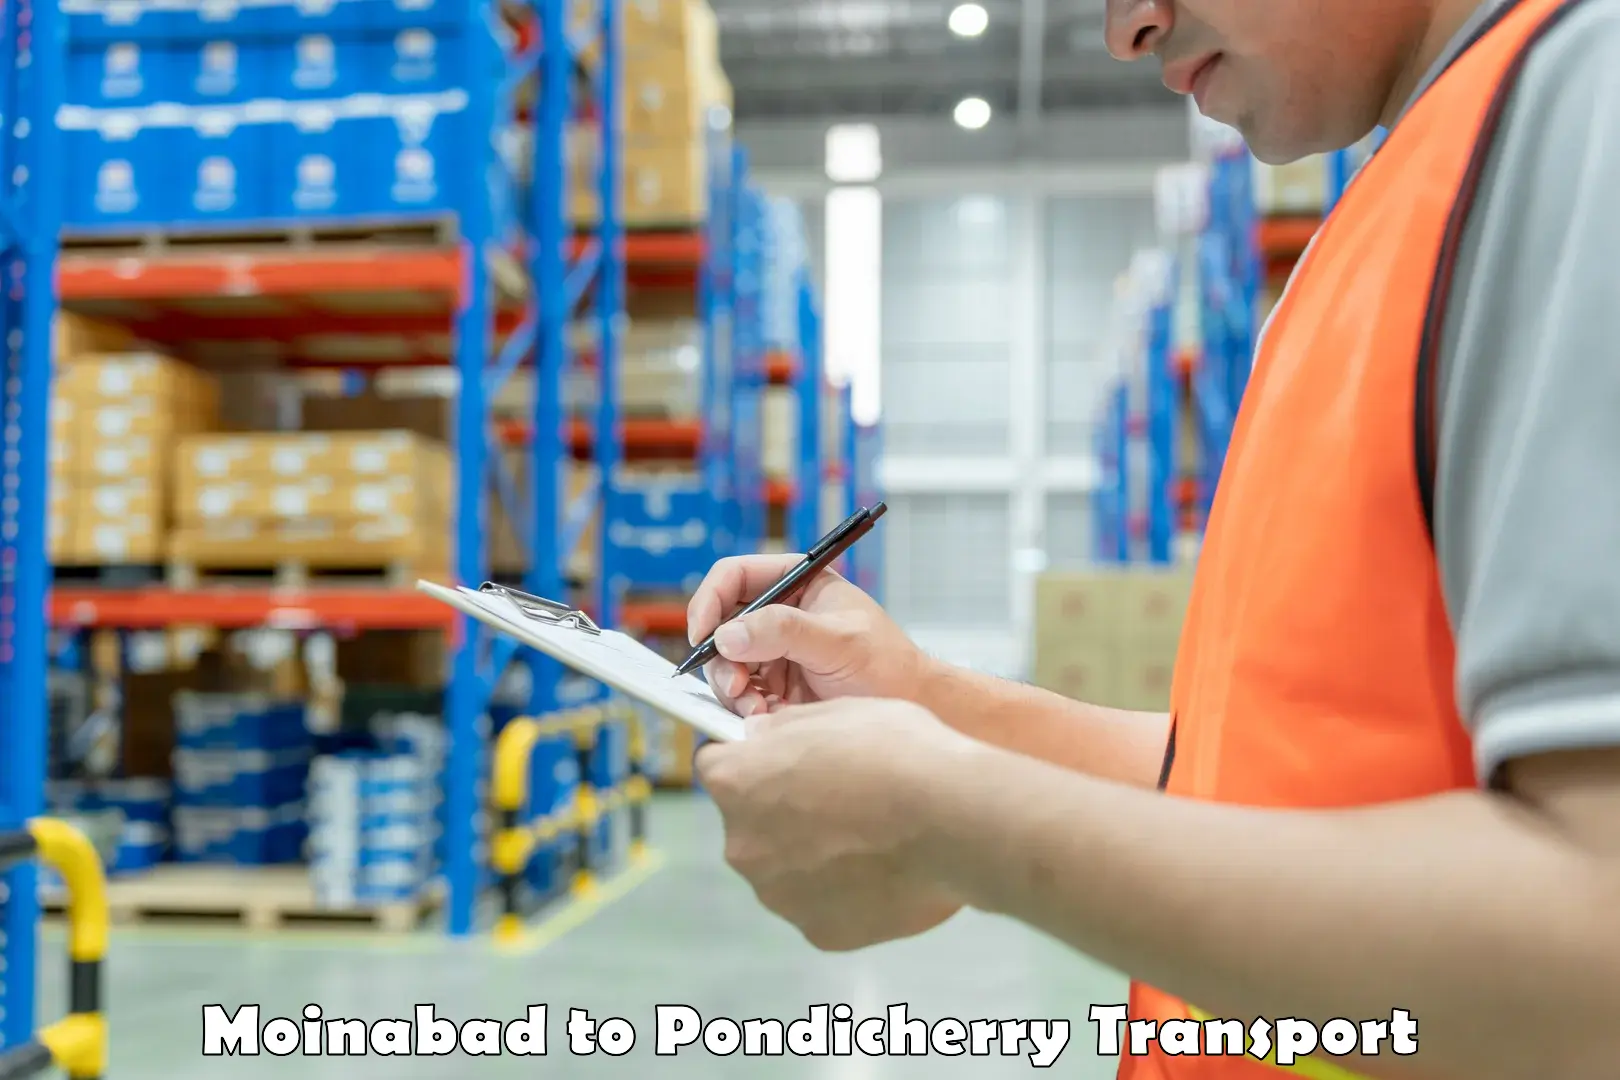 Daily parcel service transport Moinabad to Pondicherry